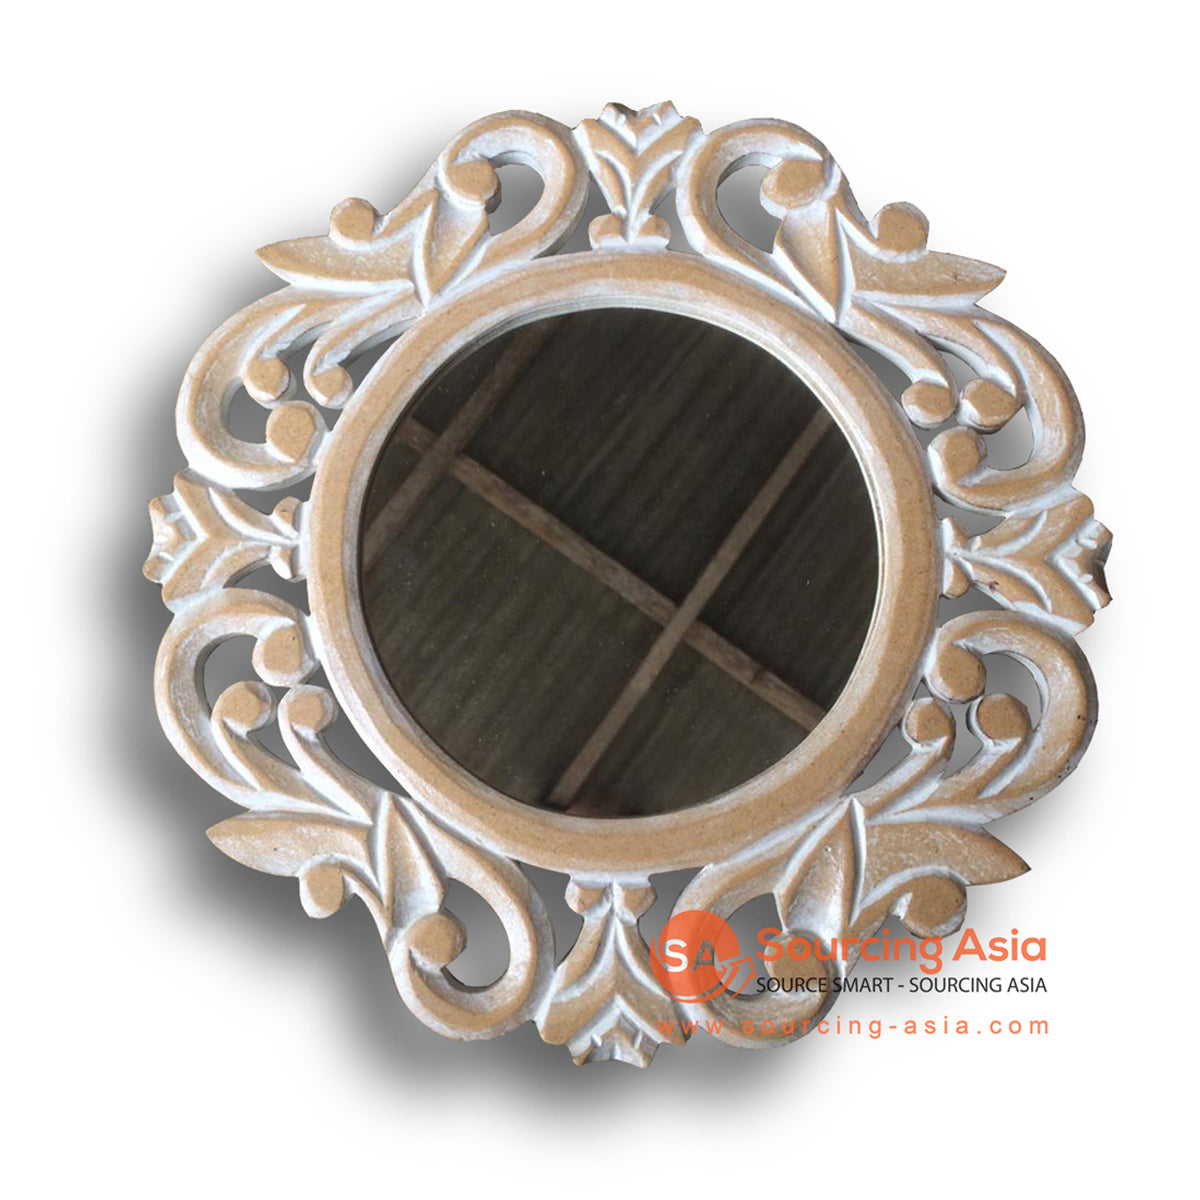 LUH062 NATURAL WHITE WASH ROUND CARVED MIRROR